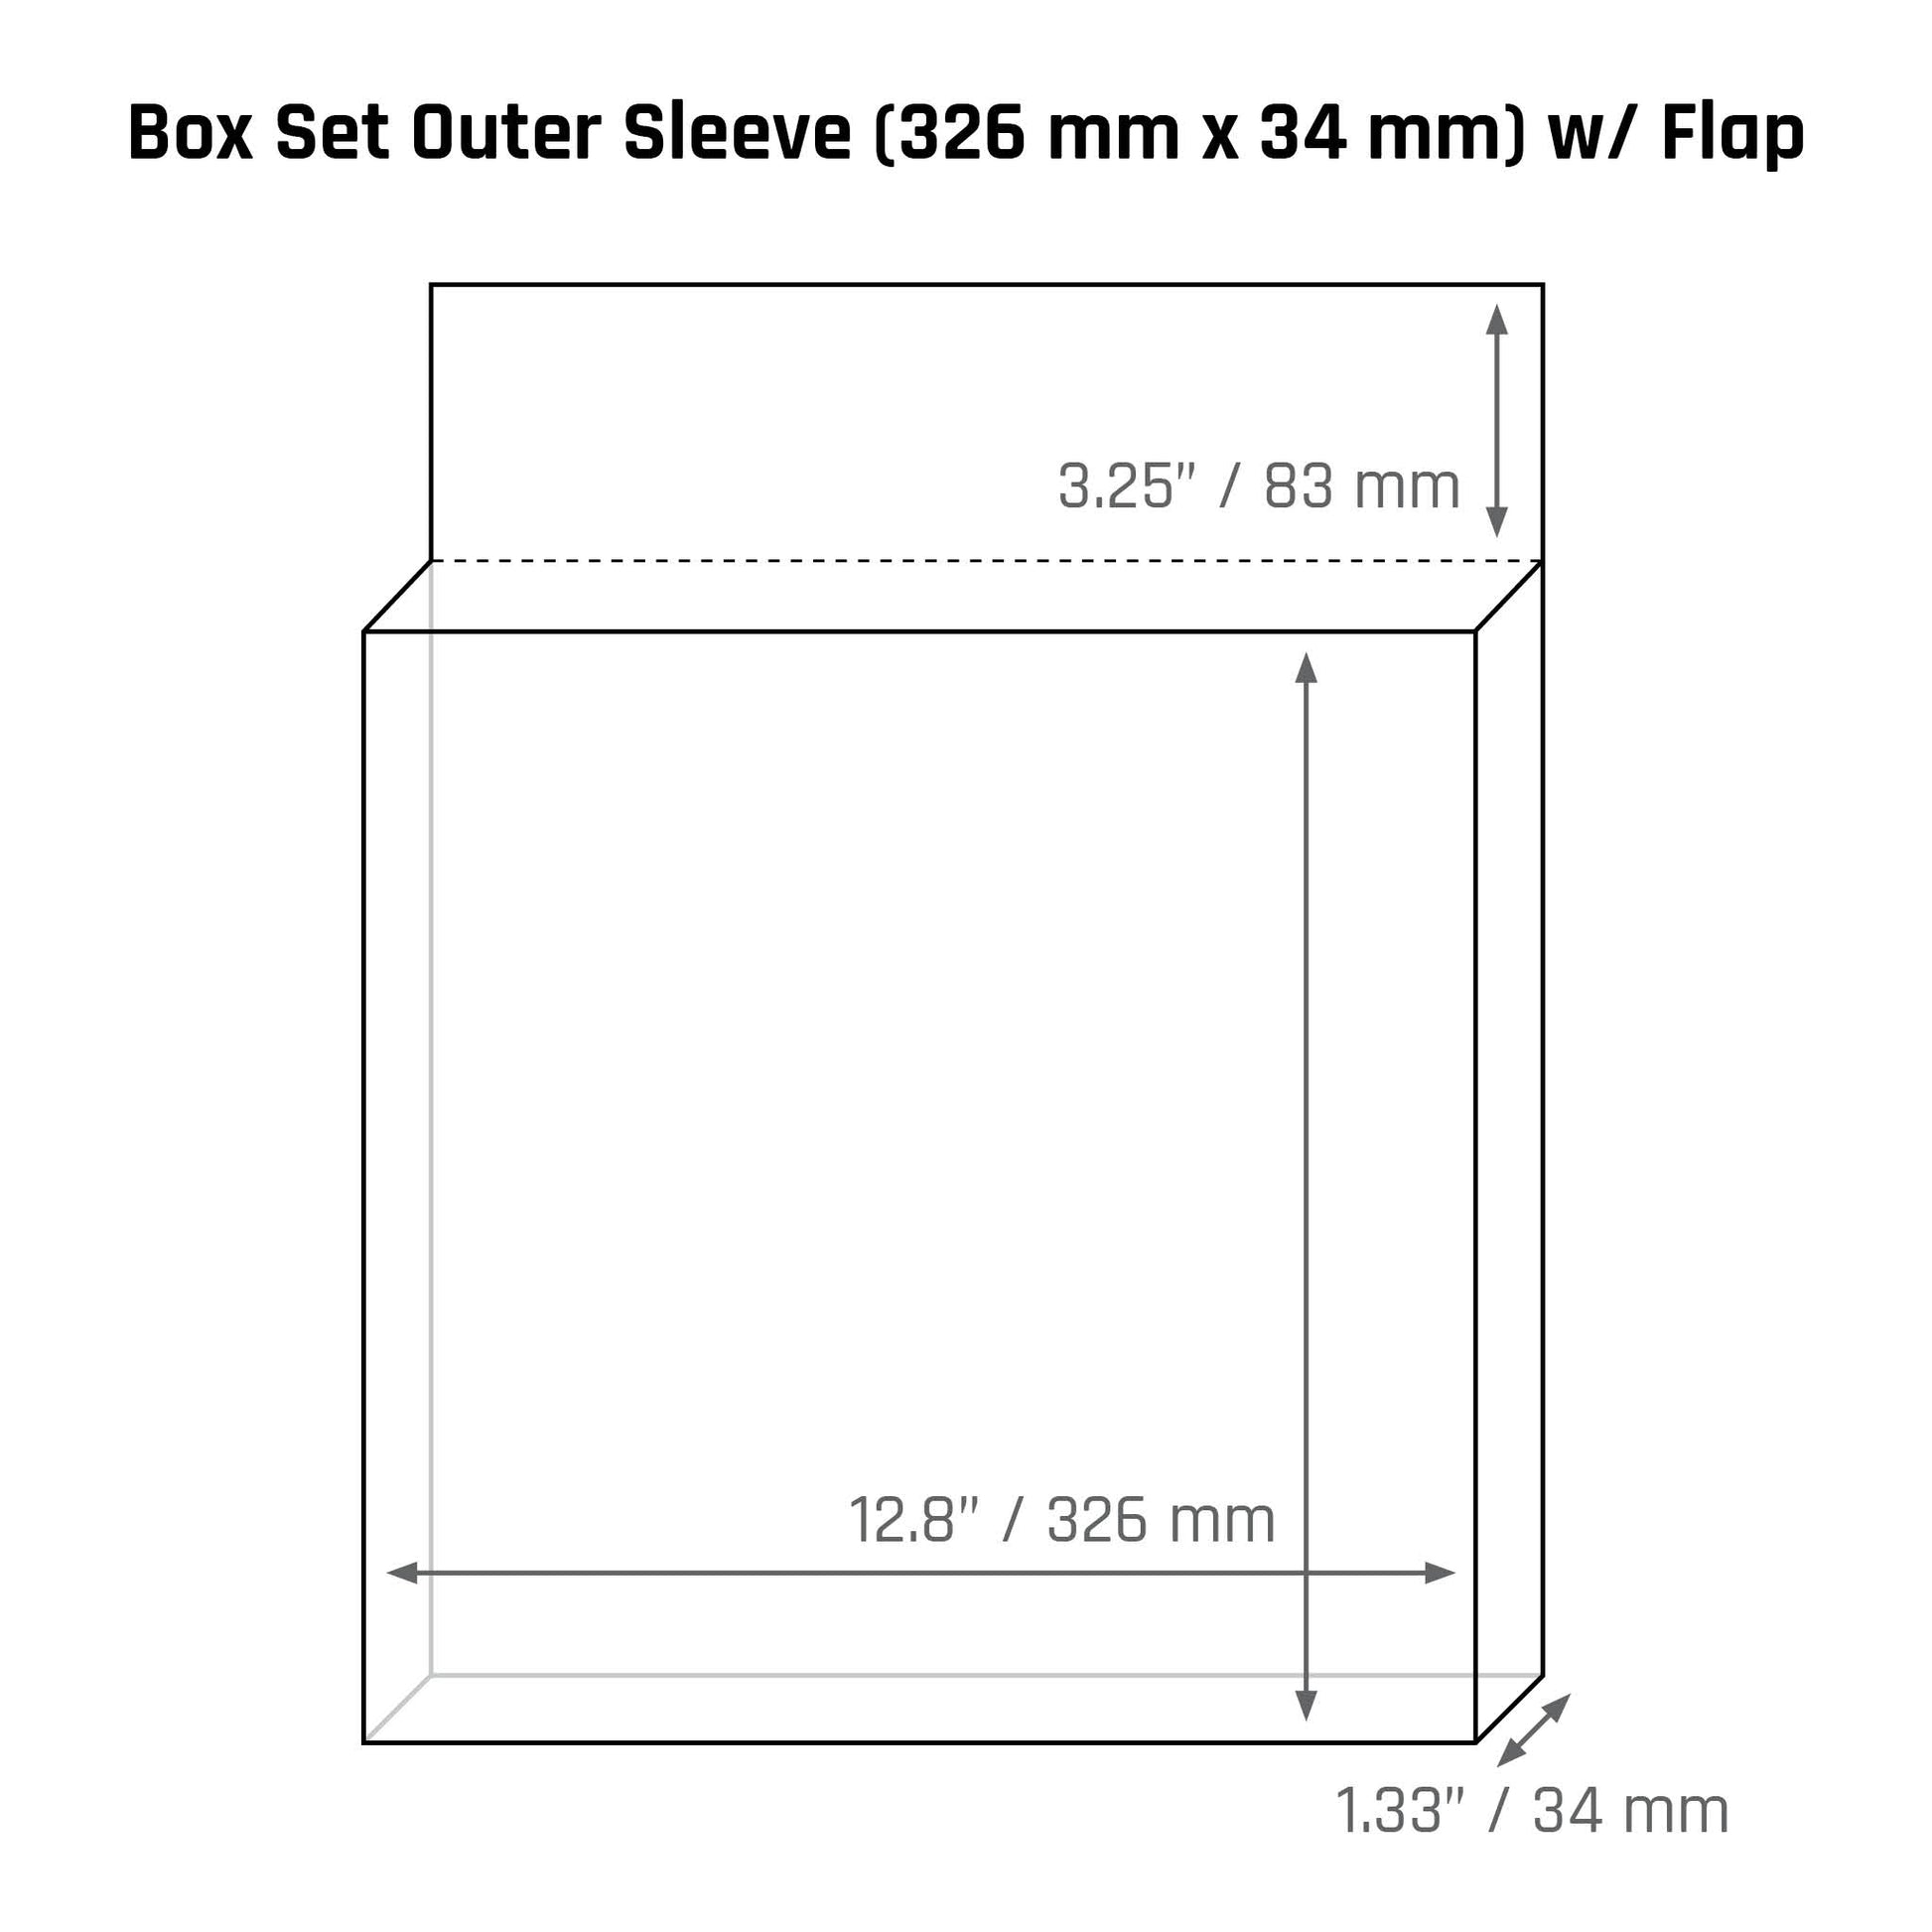 Box Set Outer Sleeve (326 mm x 34 mm) - 3mil - Vinyl Storage Solutions